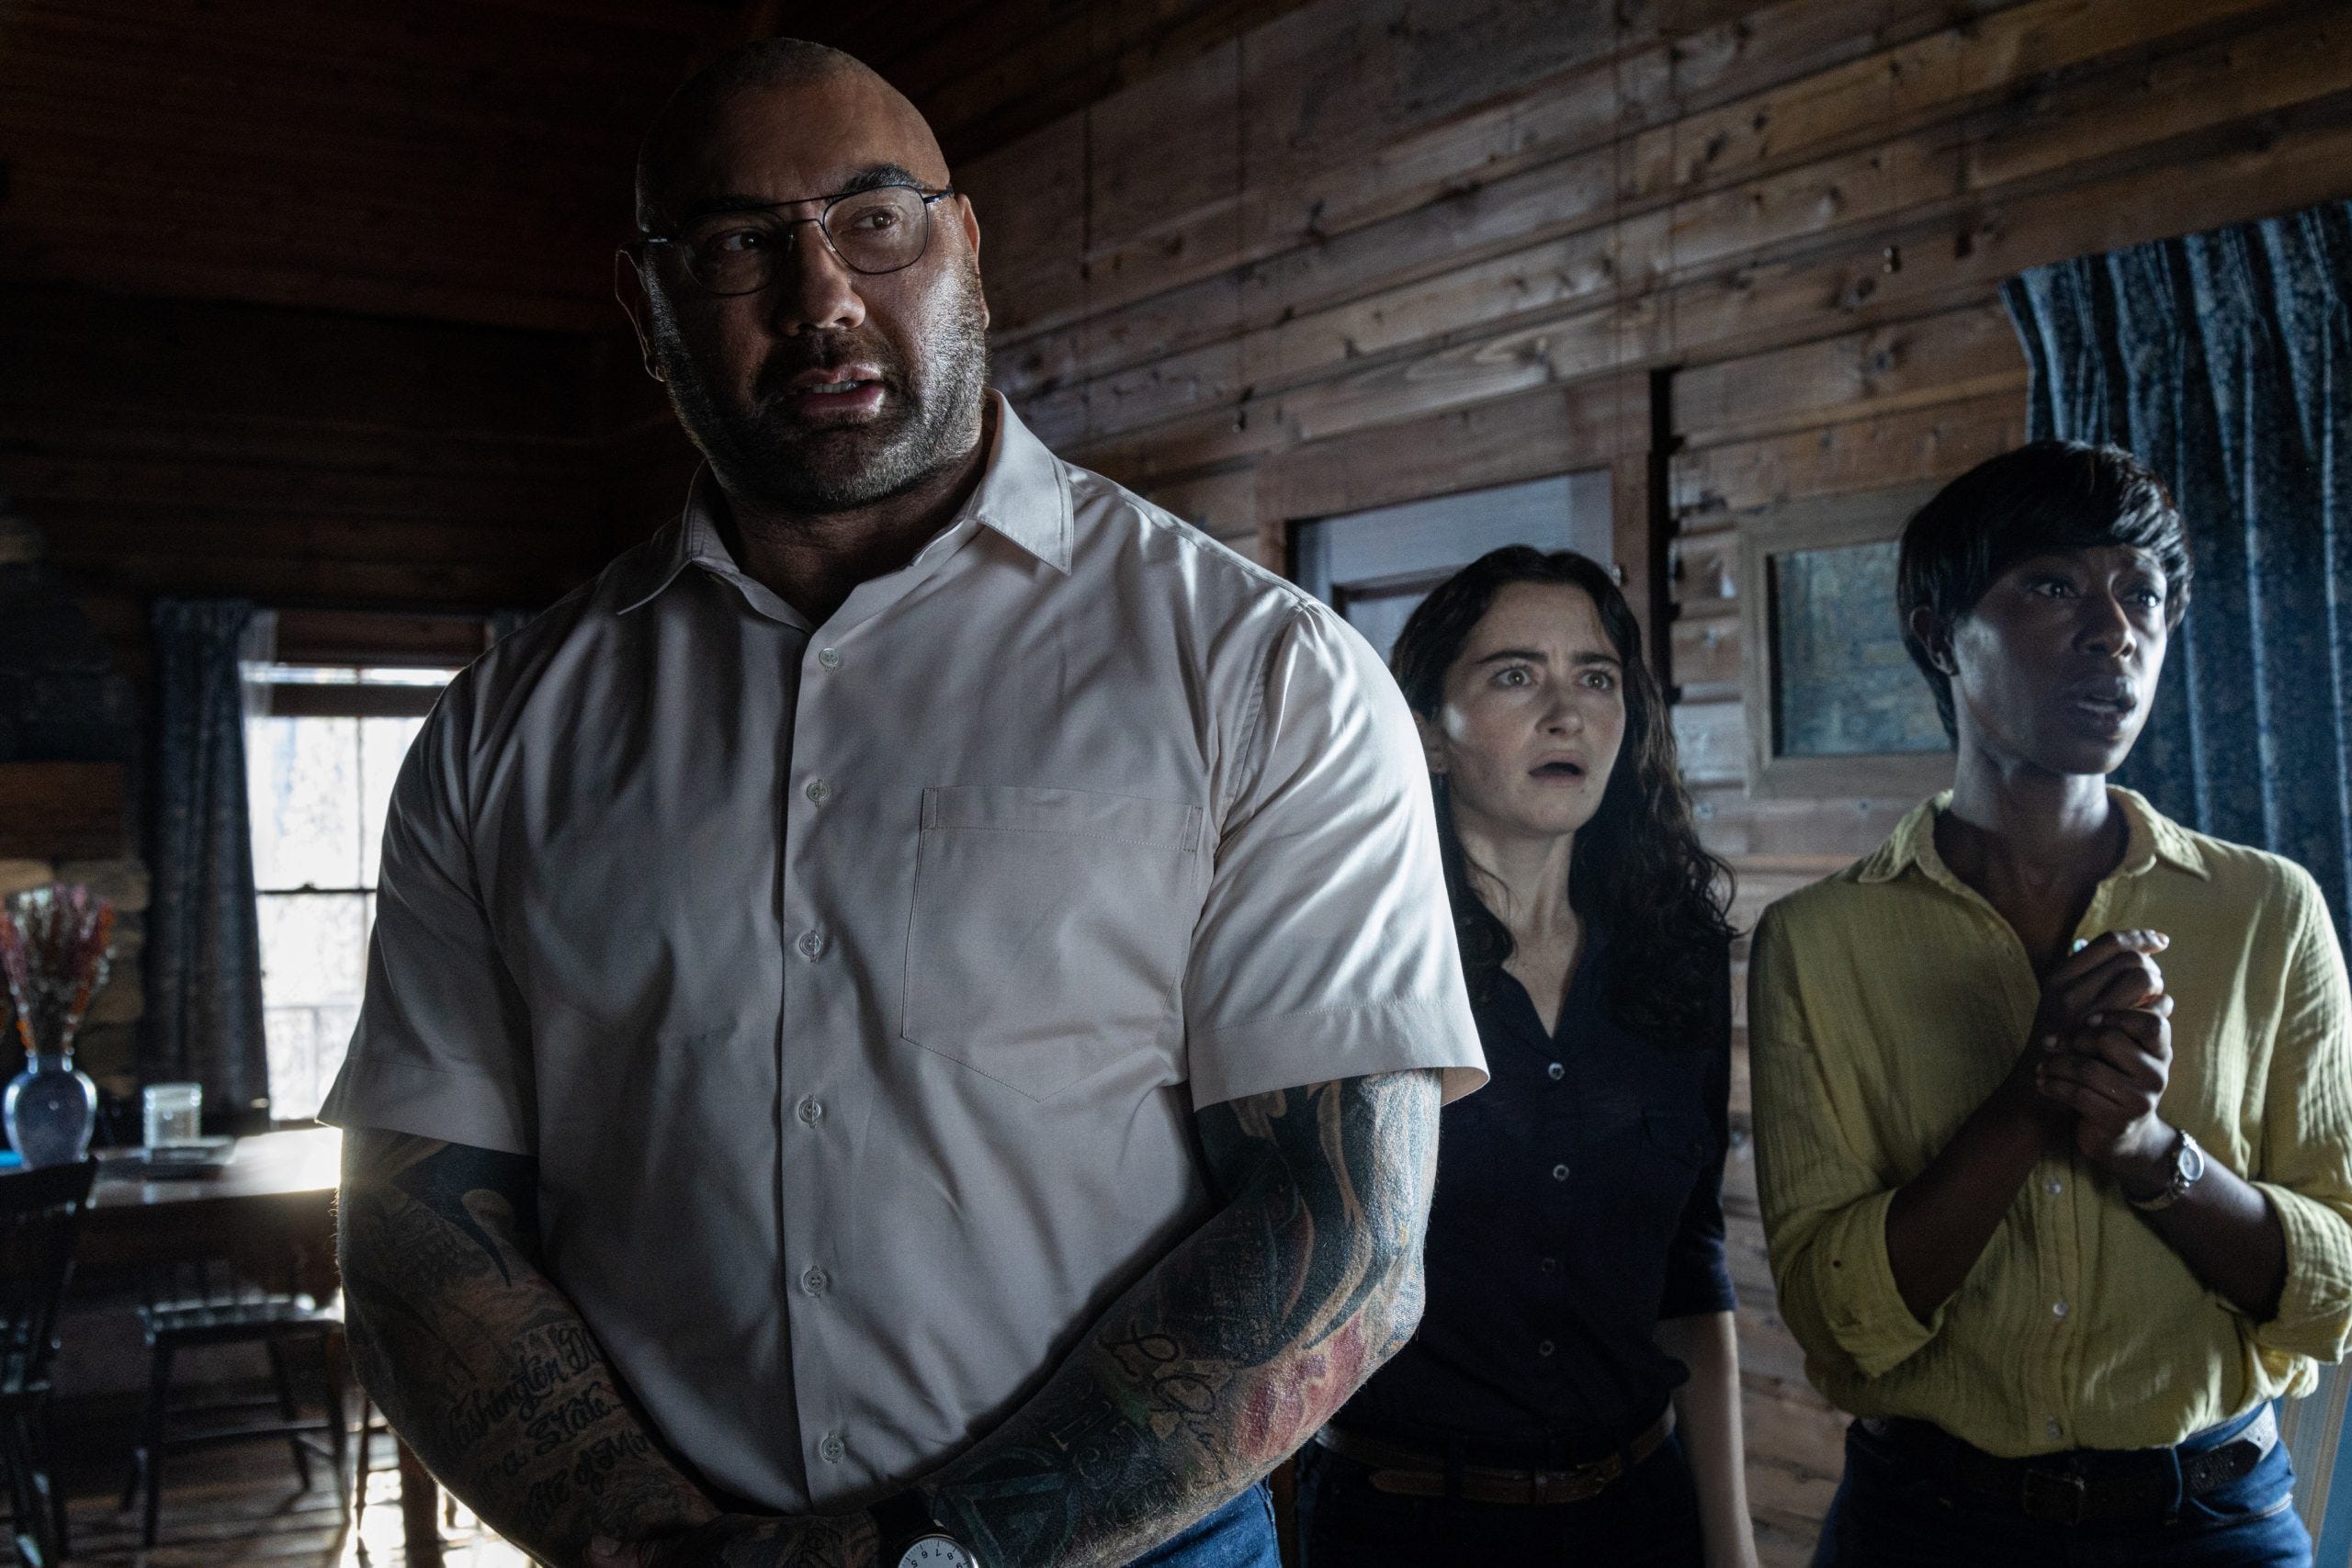 Knock at the Cabin' - Trailer for M. Night Shyamalan's New Horror!